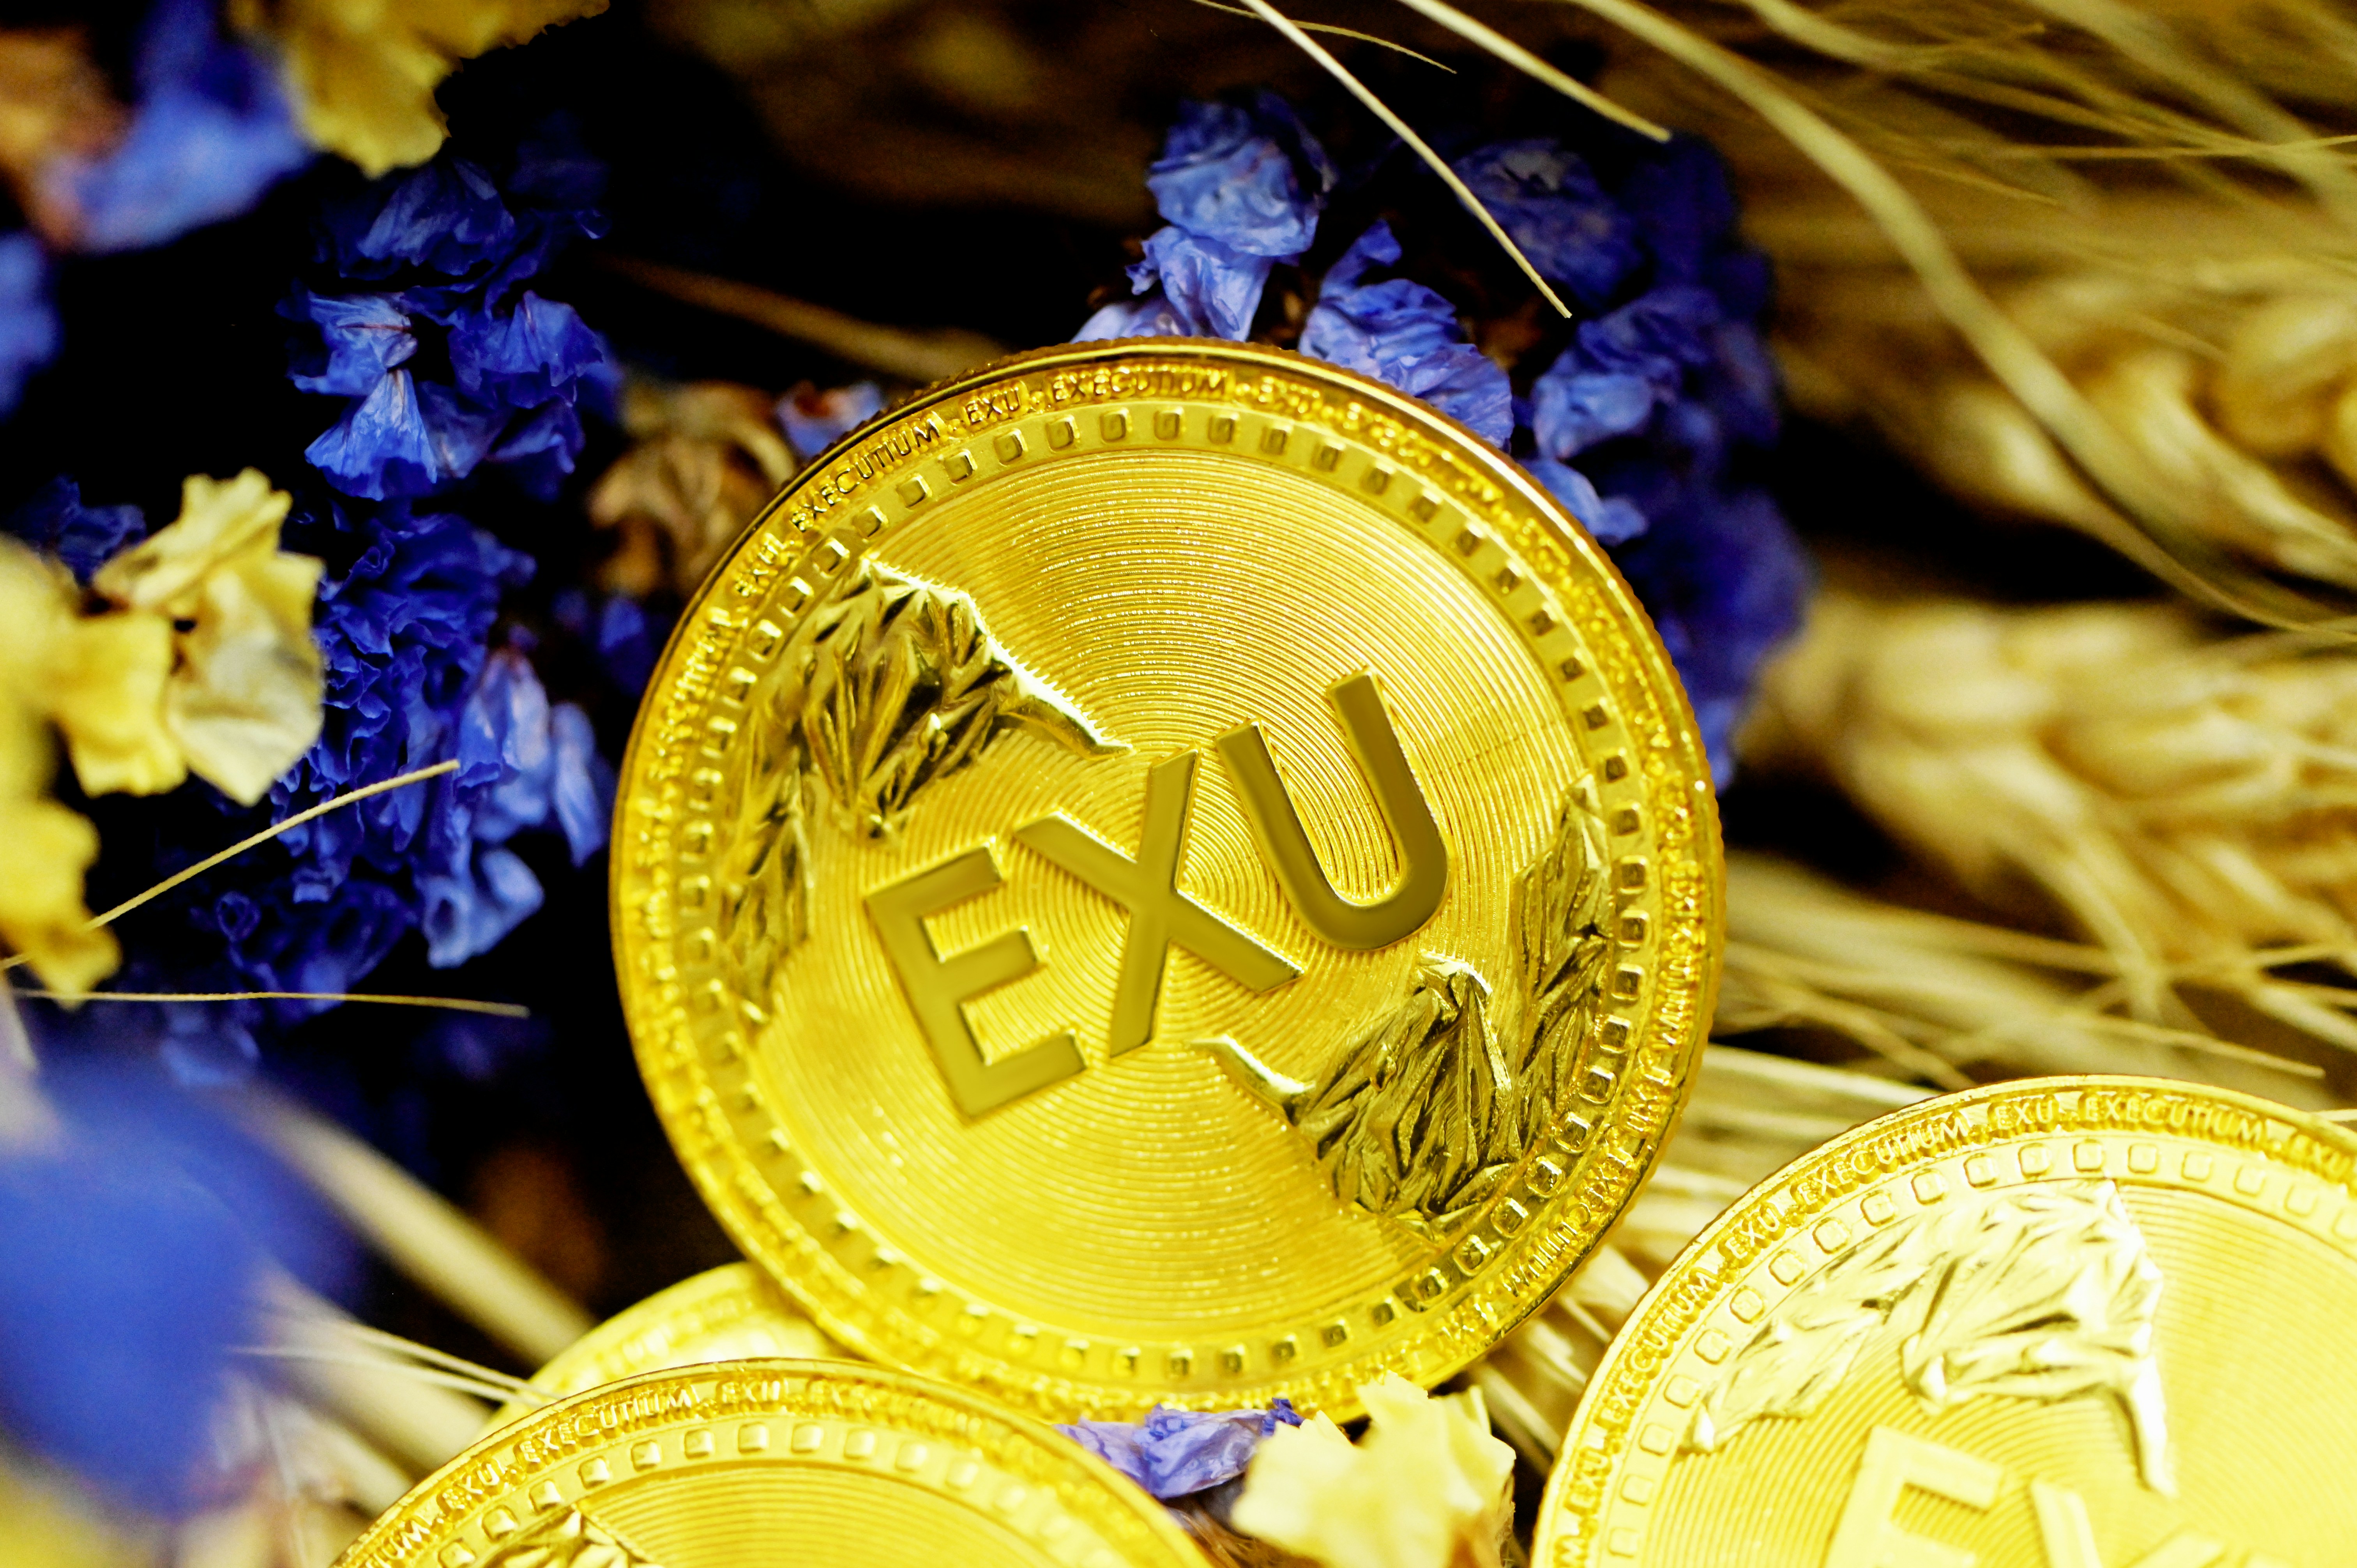 Exu coins on top of blue flowers and dried rice